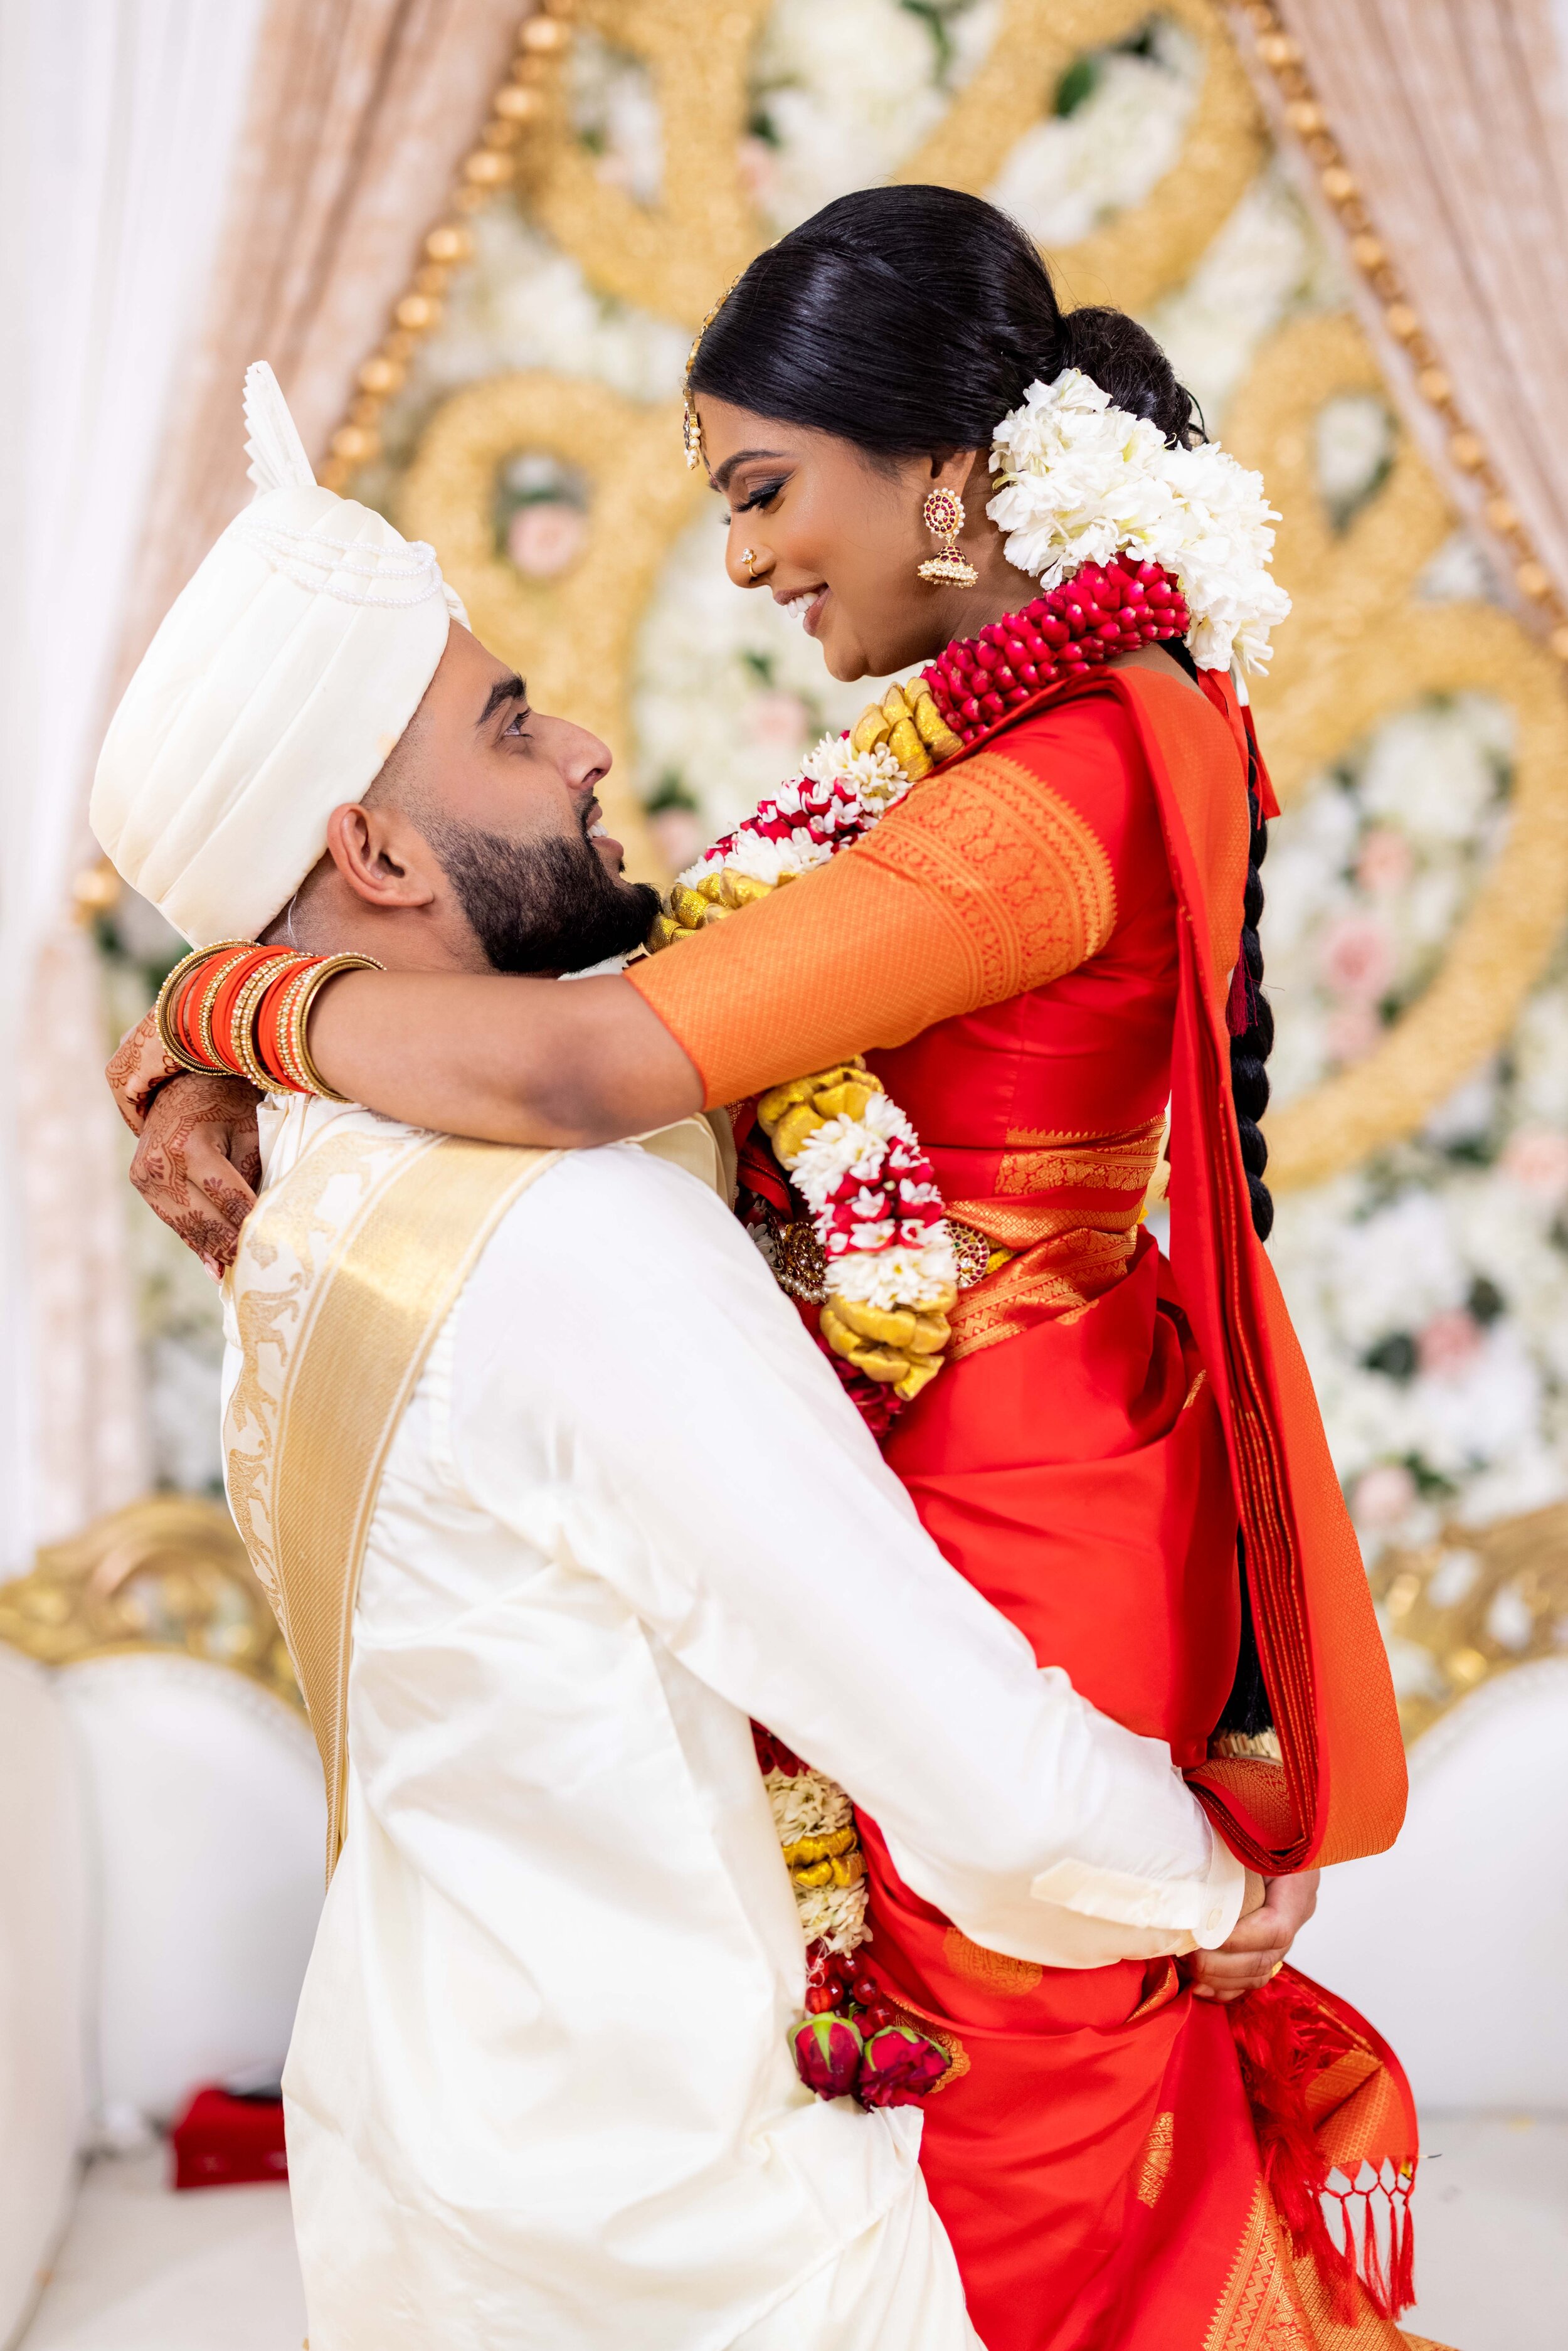 25 Best Tamil Bride Entry songs to have for wedding - Wedandbeyond